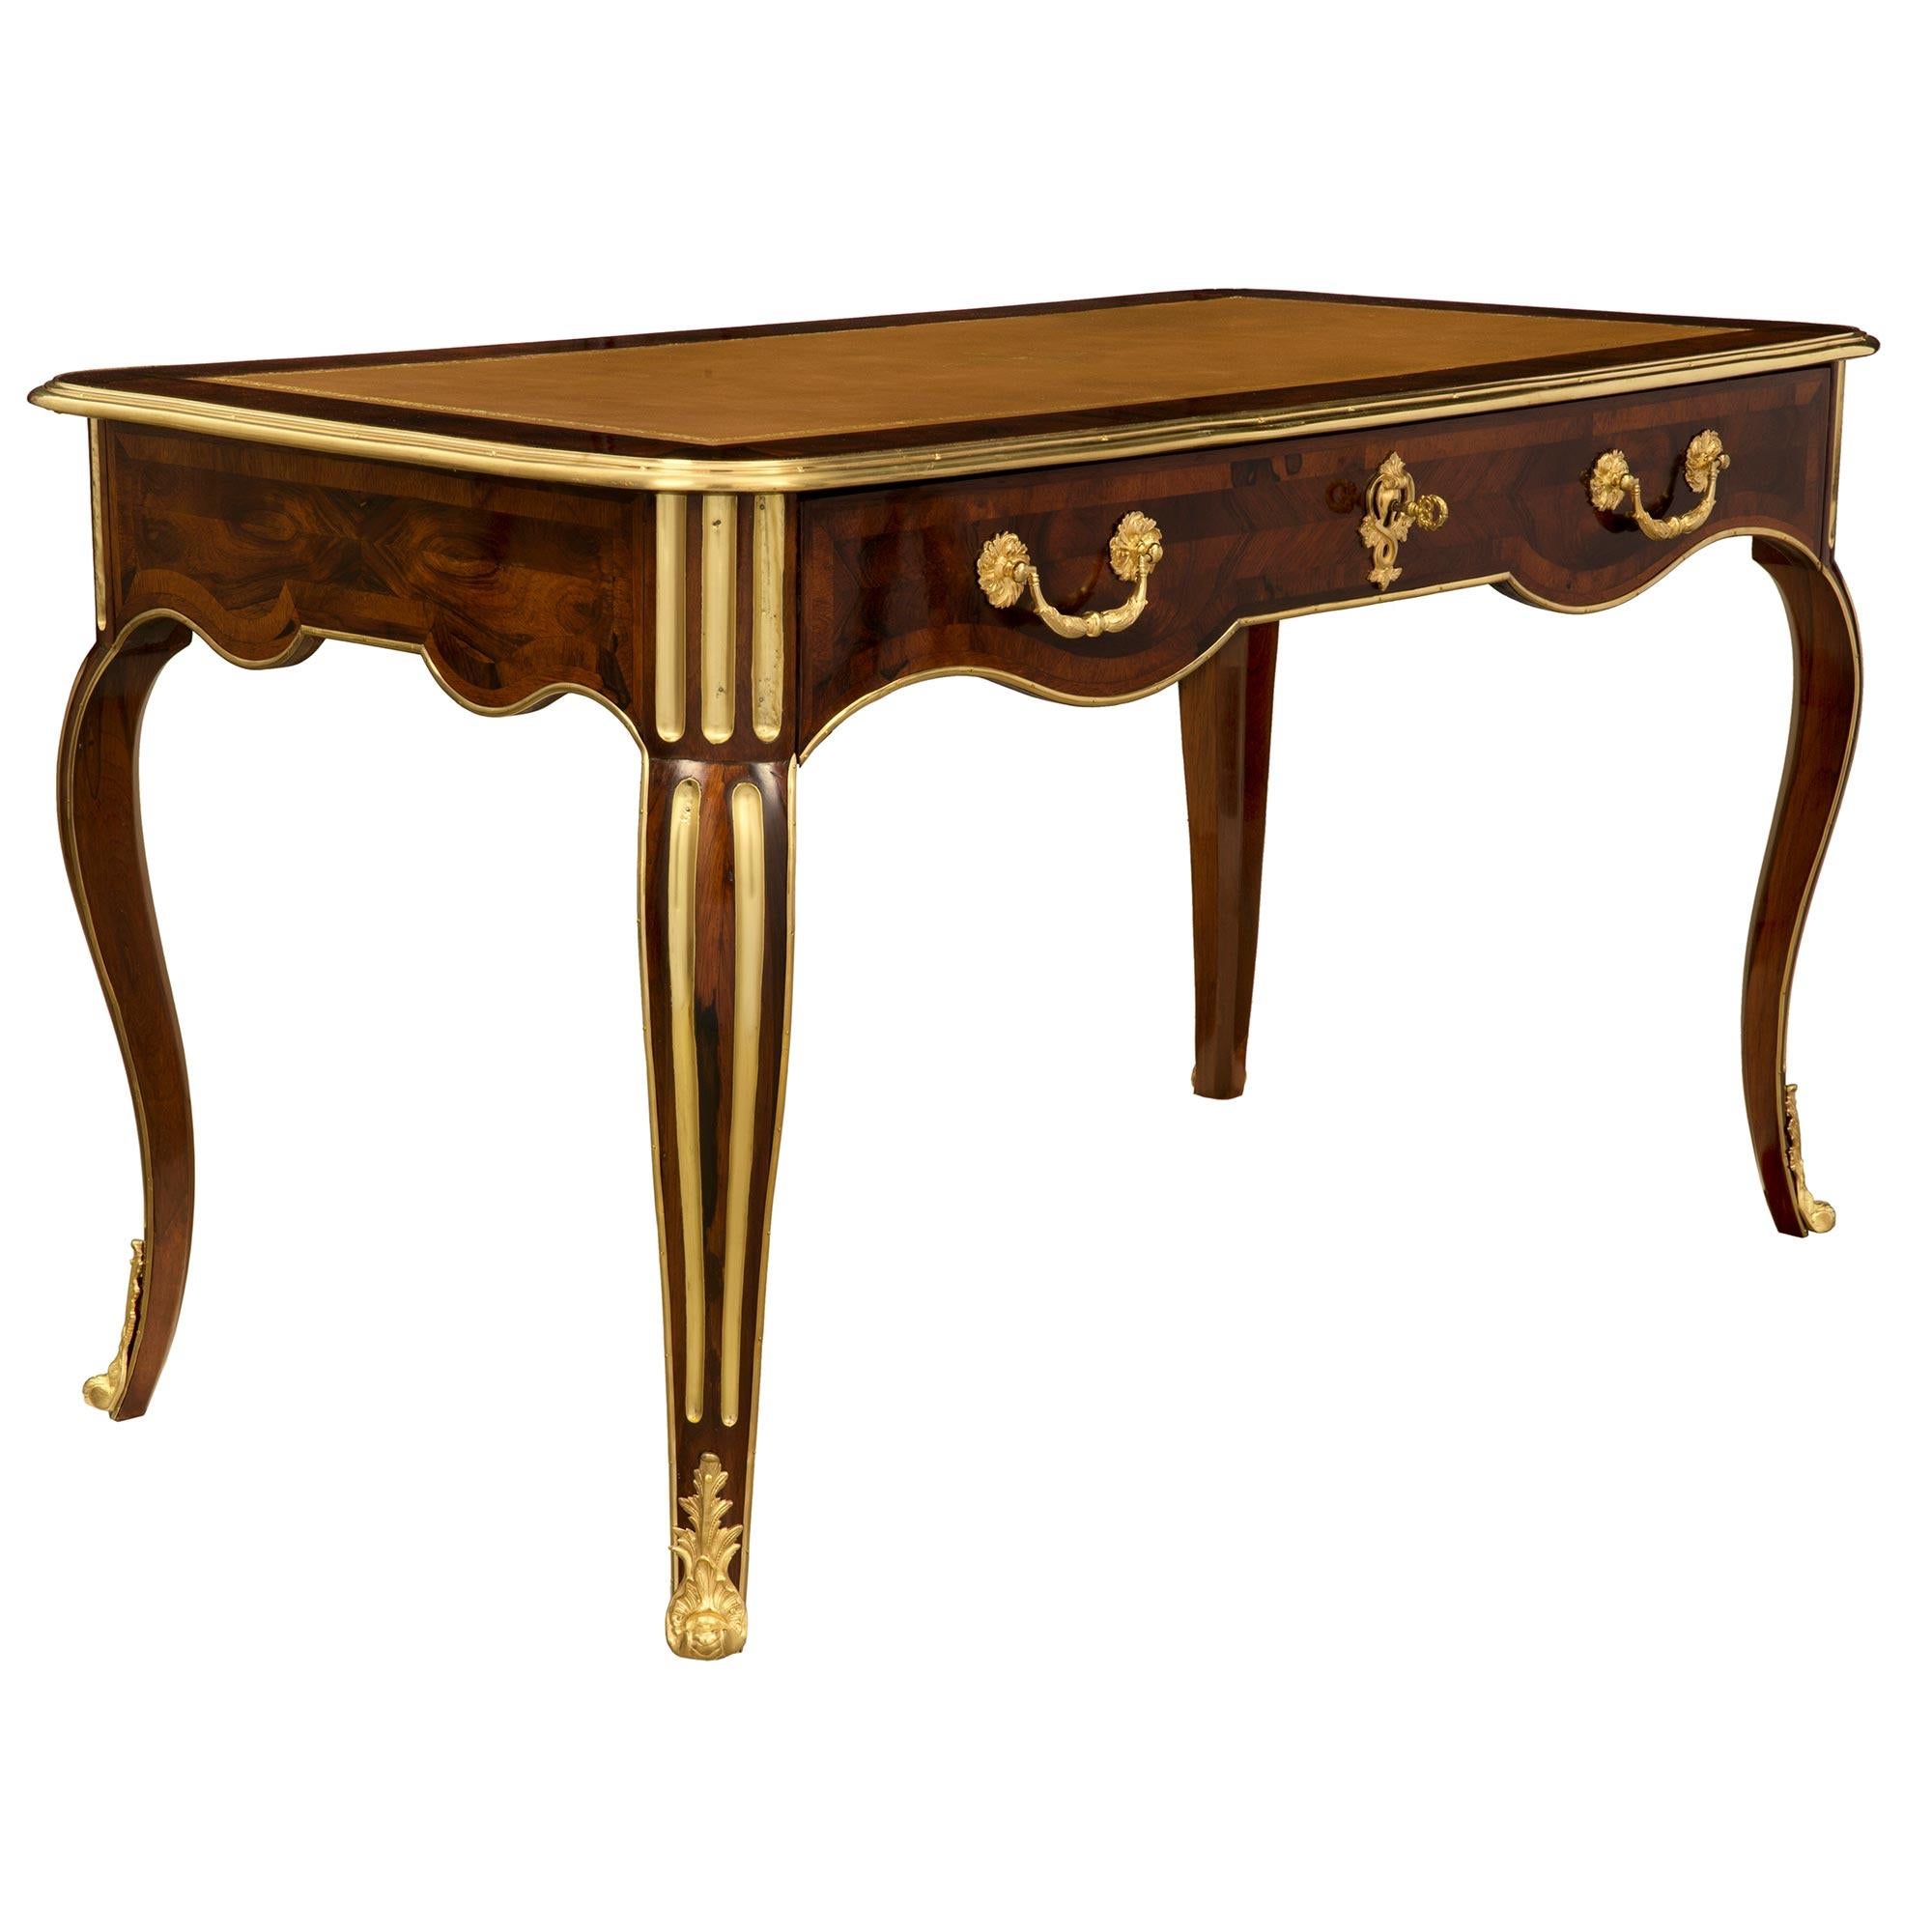 French 19th Century Regence Style Rosewood, Ormolu and Brass Desk In Good Condition For Sale In West Palm Beach, FL